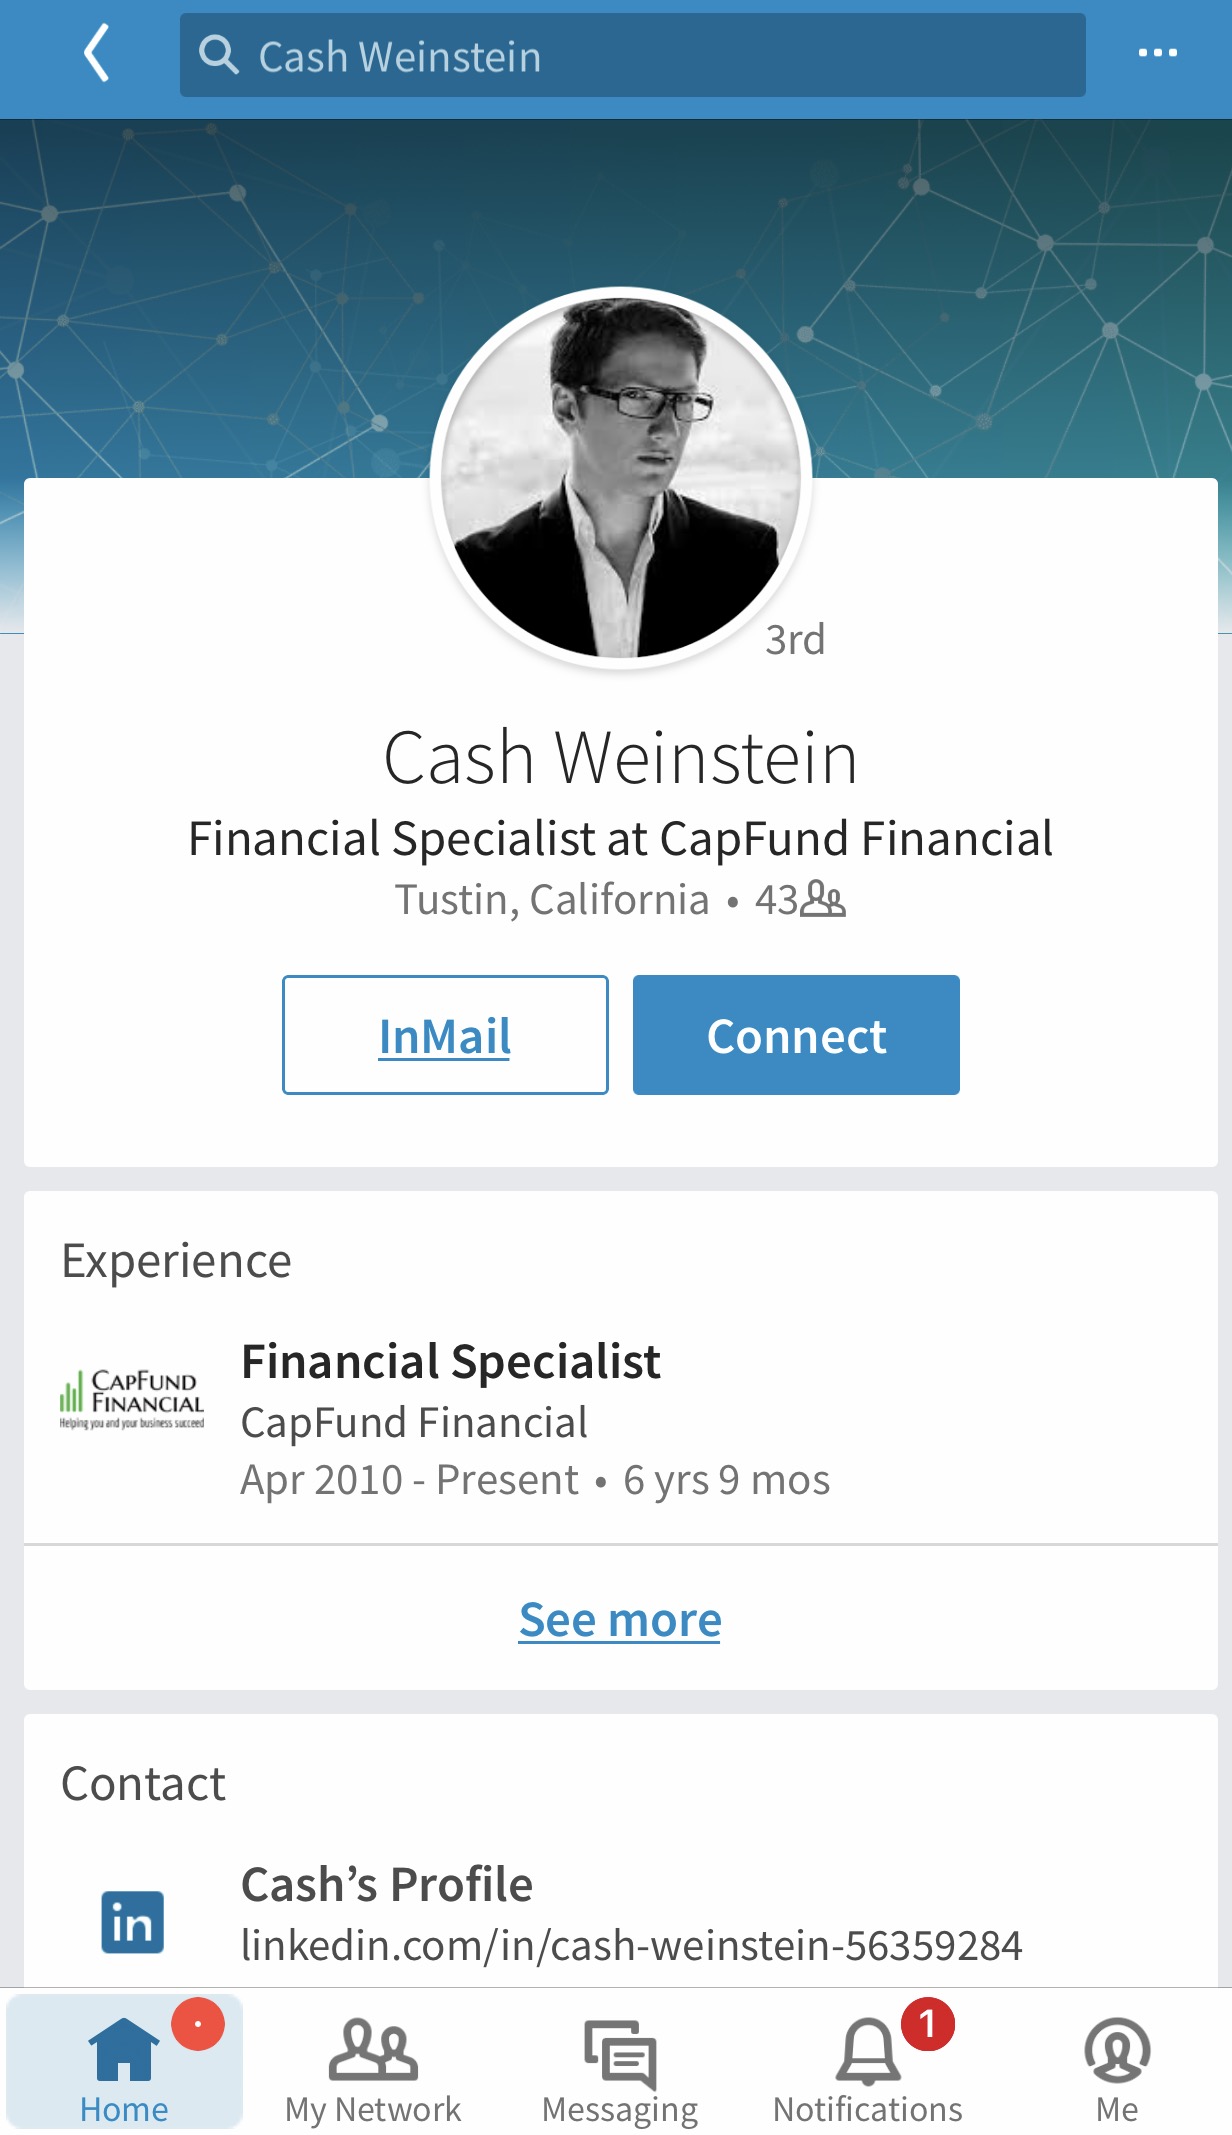 Brian's fake LinkedIn Profile with alias "Cash Weinstein". Fake picture as well. 